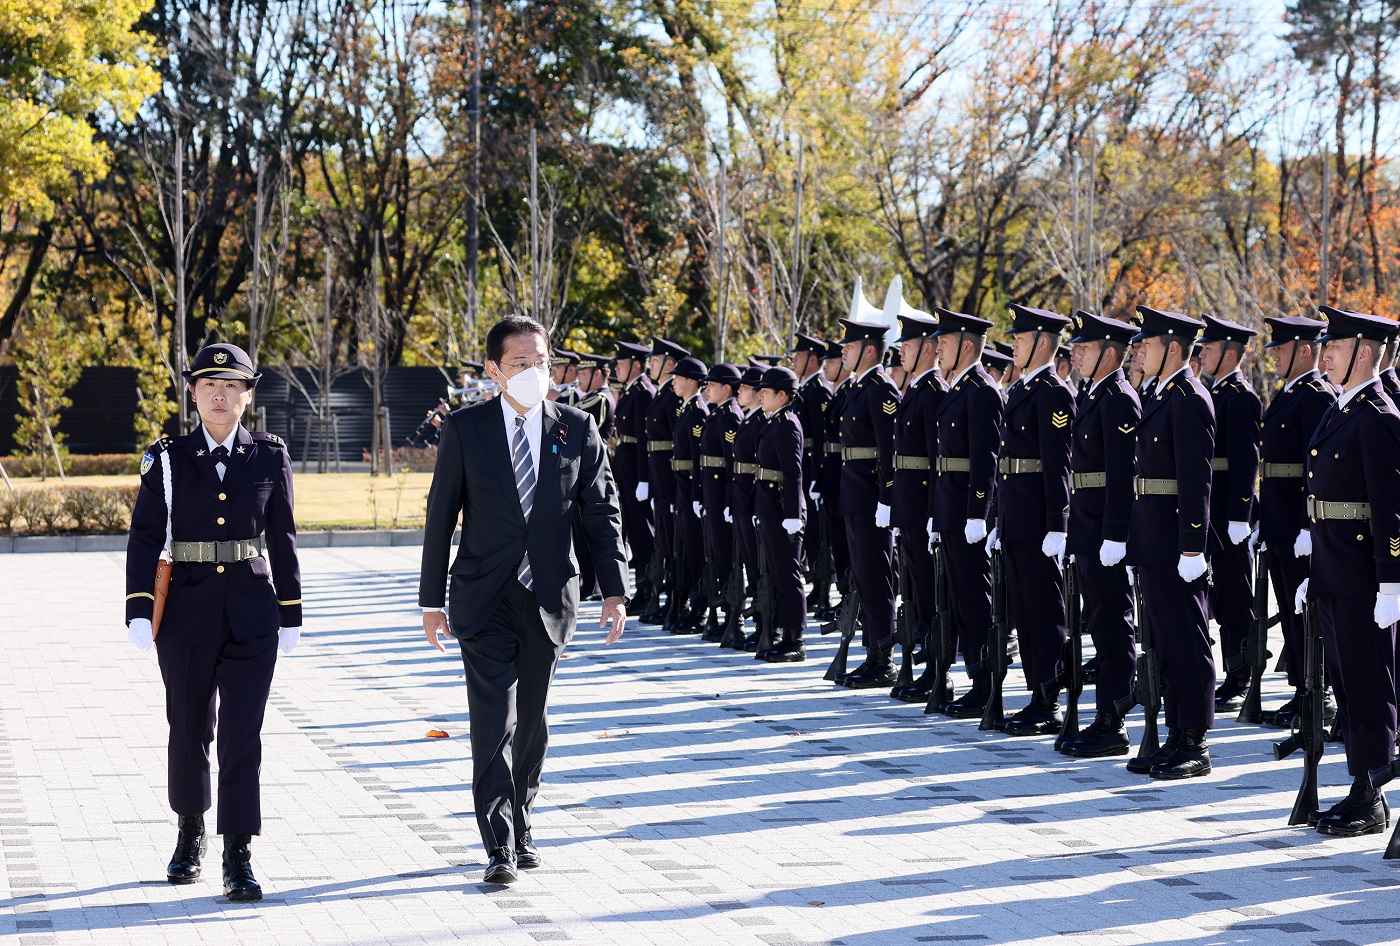 Photograph of the Prime Minister receiving a salute and attending a guard of honor ceremony (1)